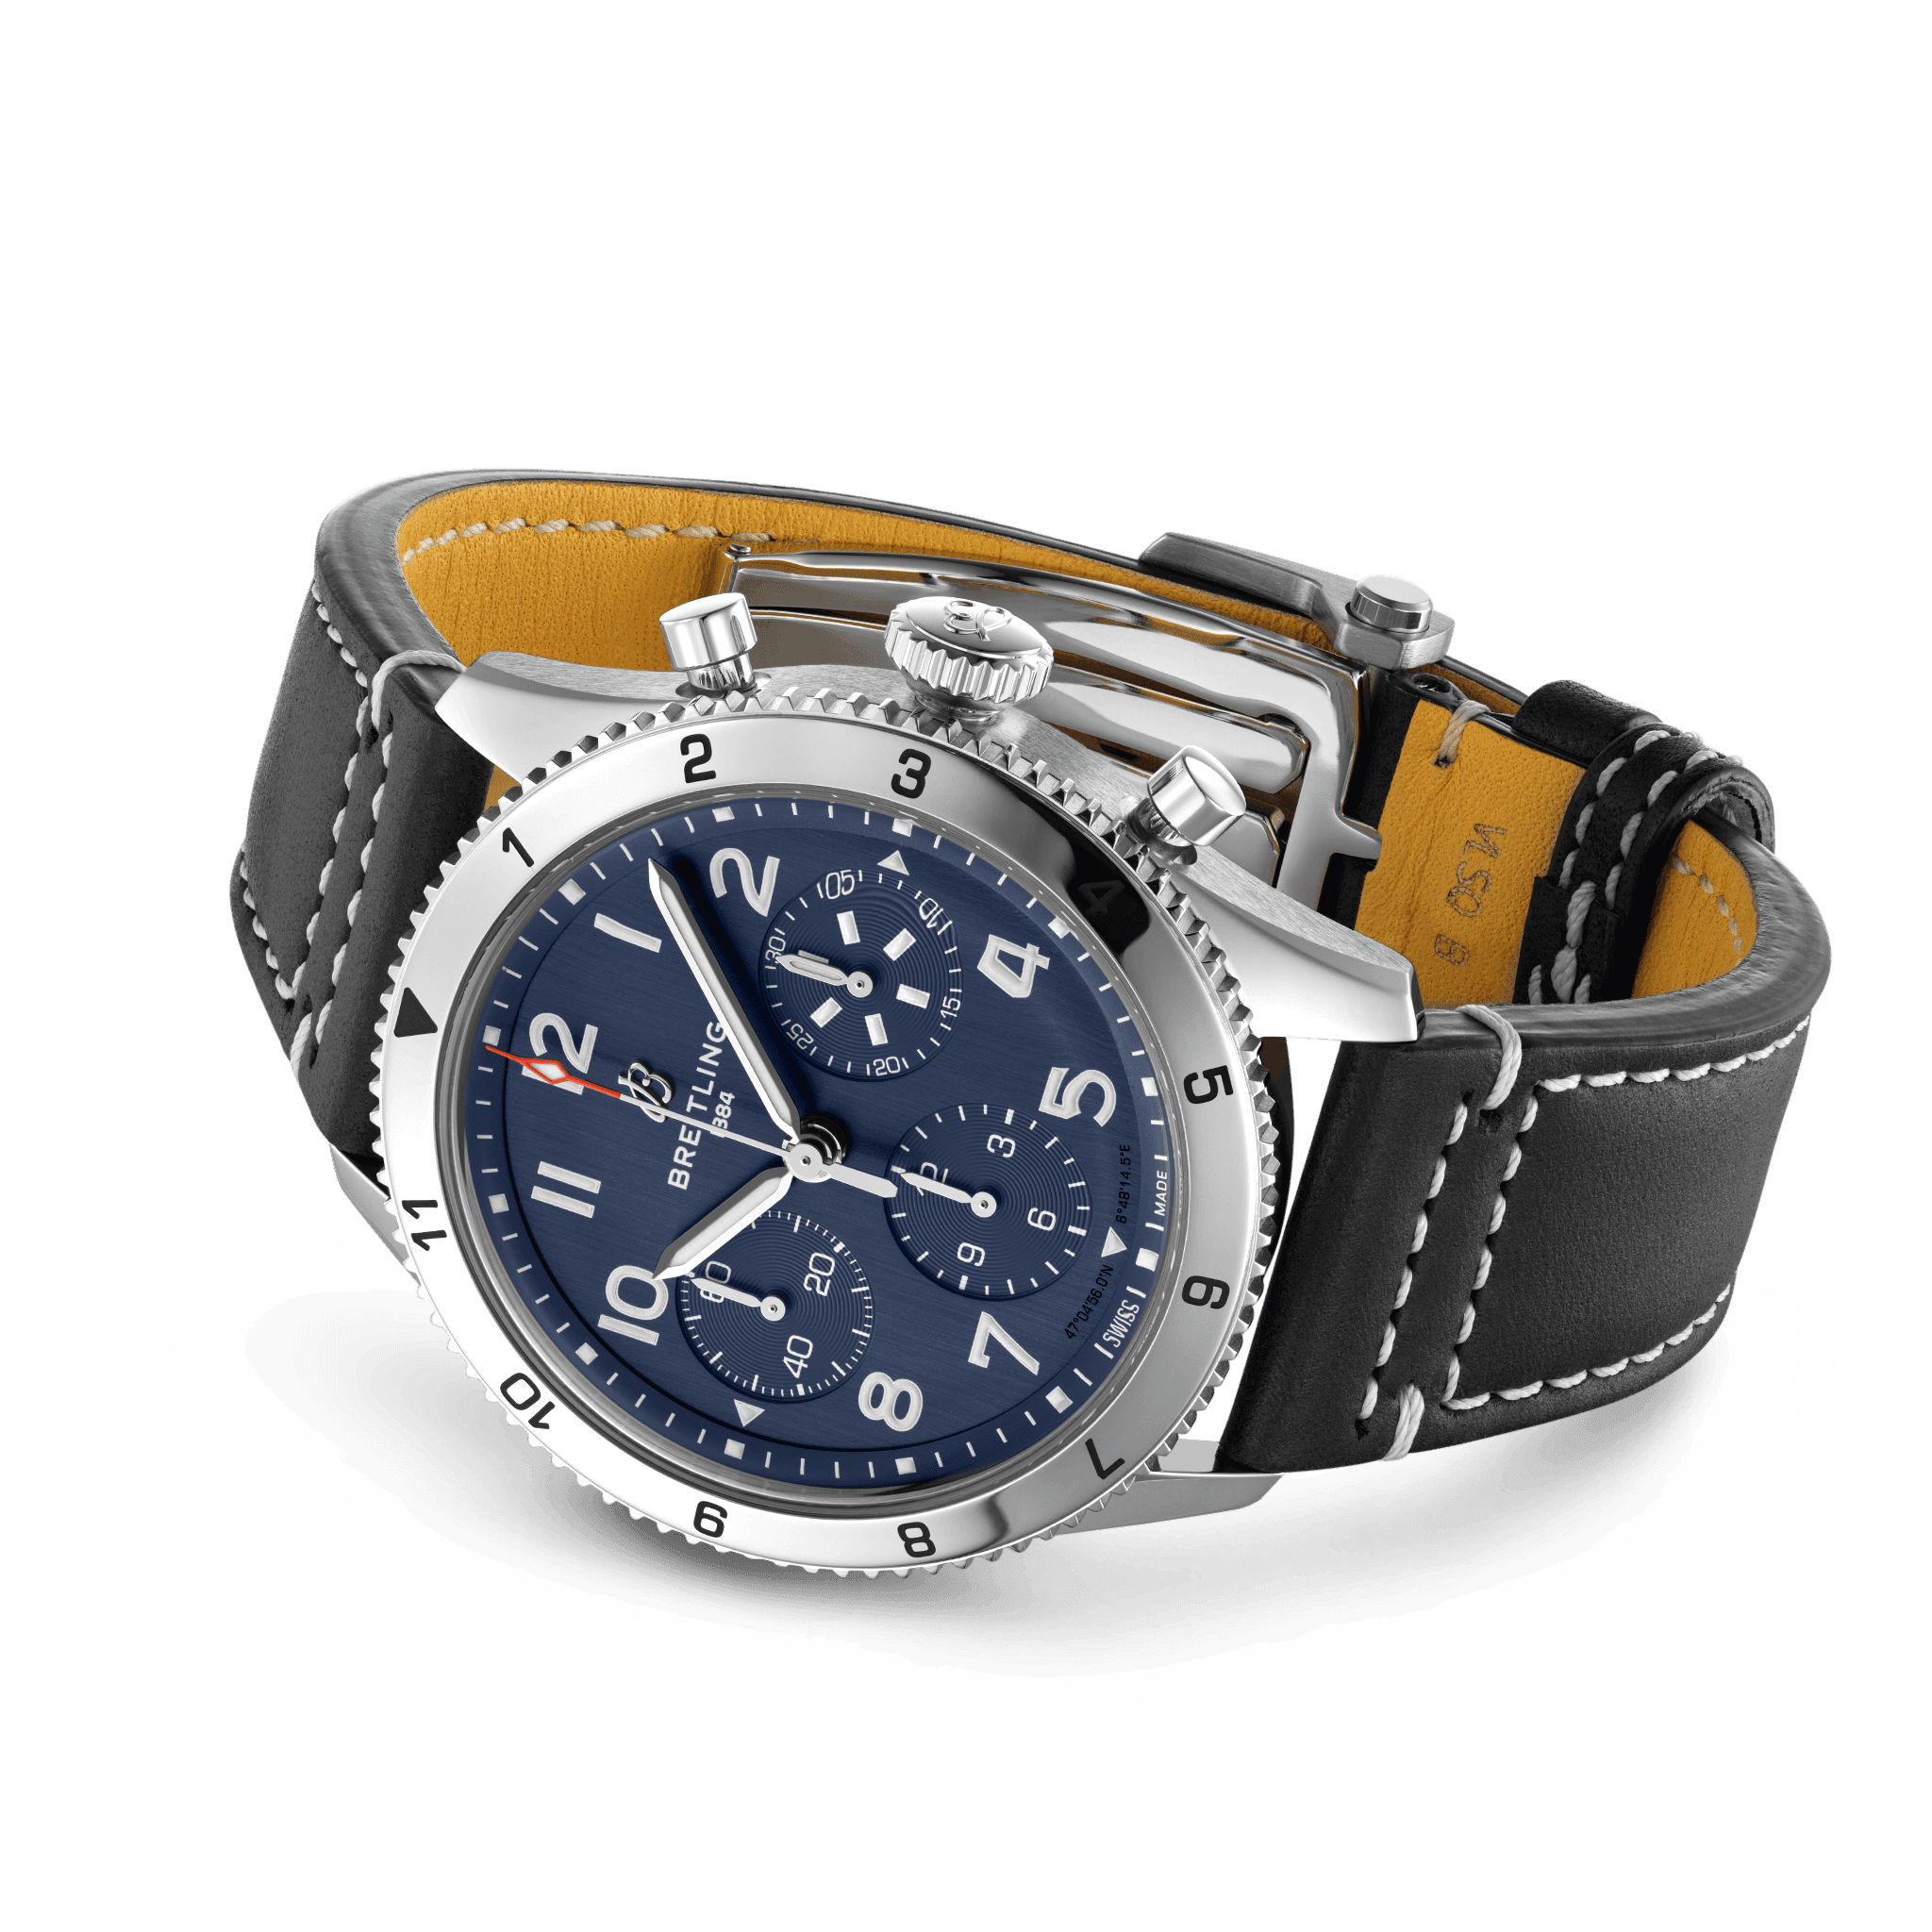 BREITLING CLASSIC AVI CHRONOGRAPH 42 TRIBUTE TO VOUGHT F4U CORSAIR AUTOMATIC 42 MM STAINLESS STEEL BLUE